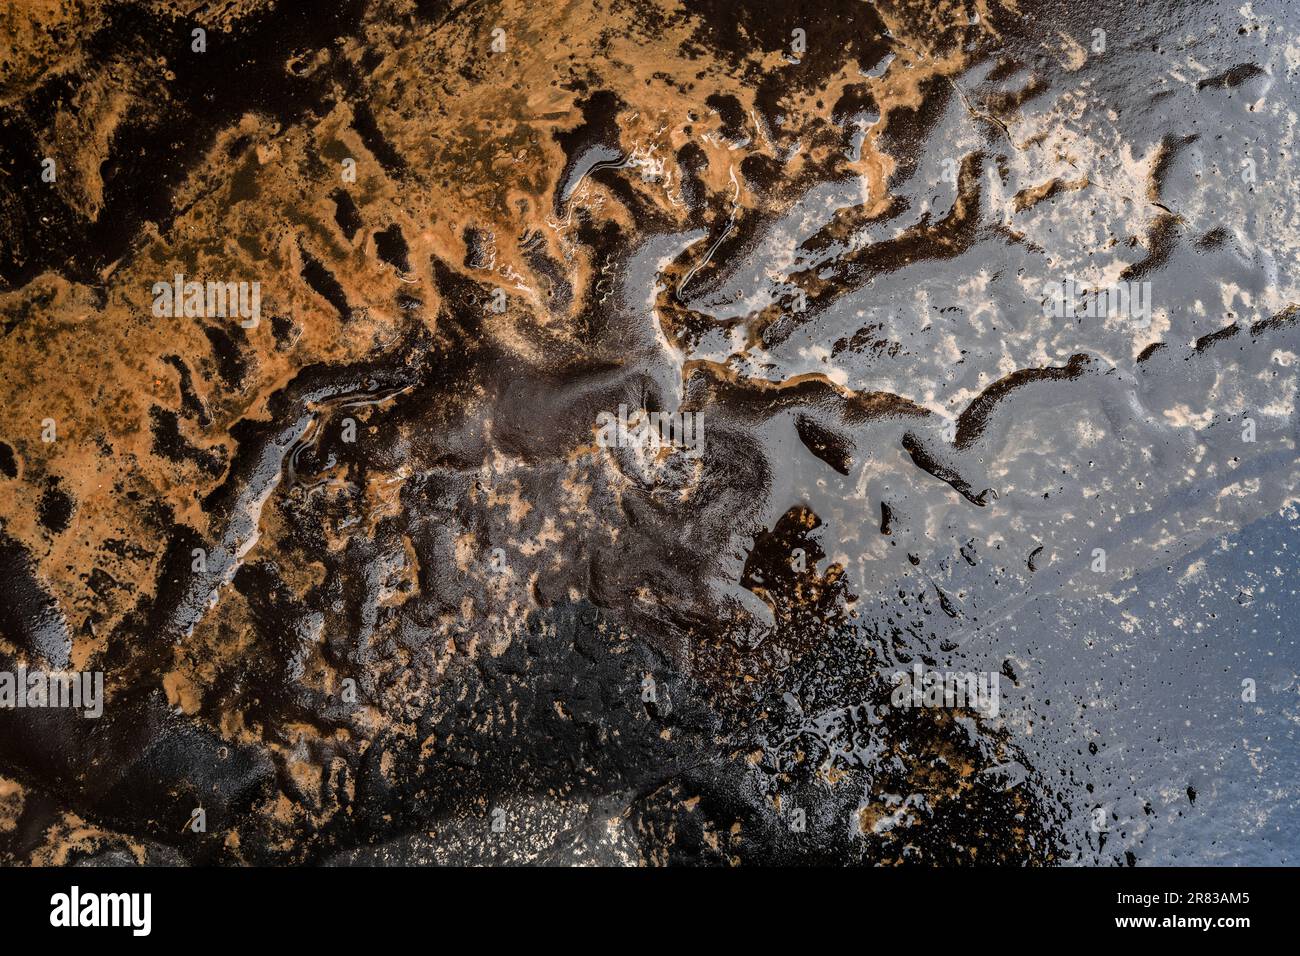 Rainwater washes away the soil and creates shapes resembling running horses. Stock Photo